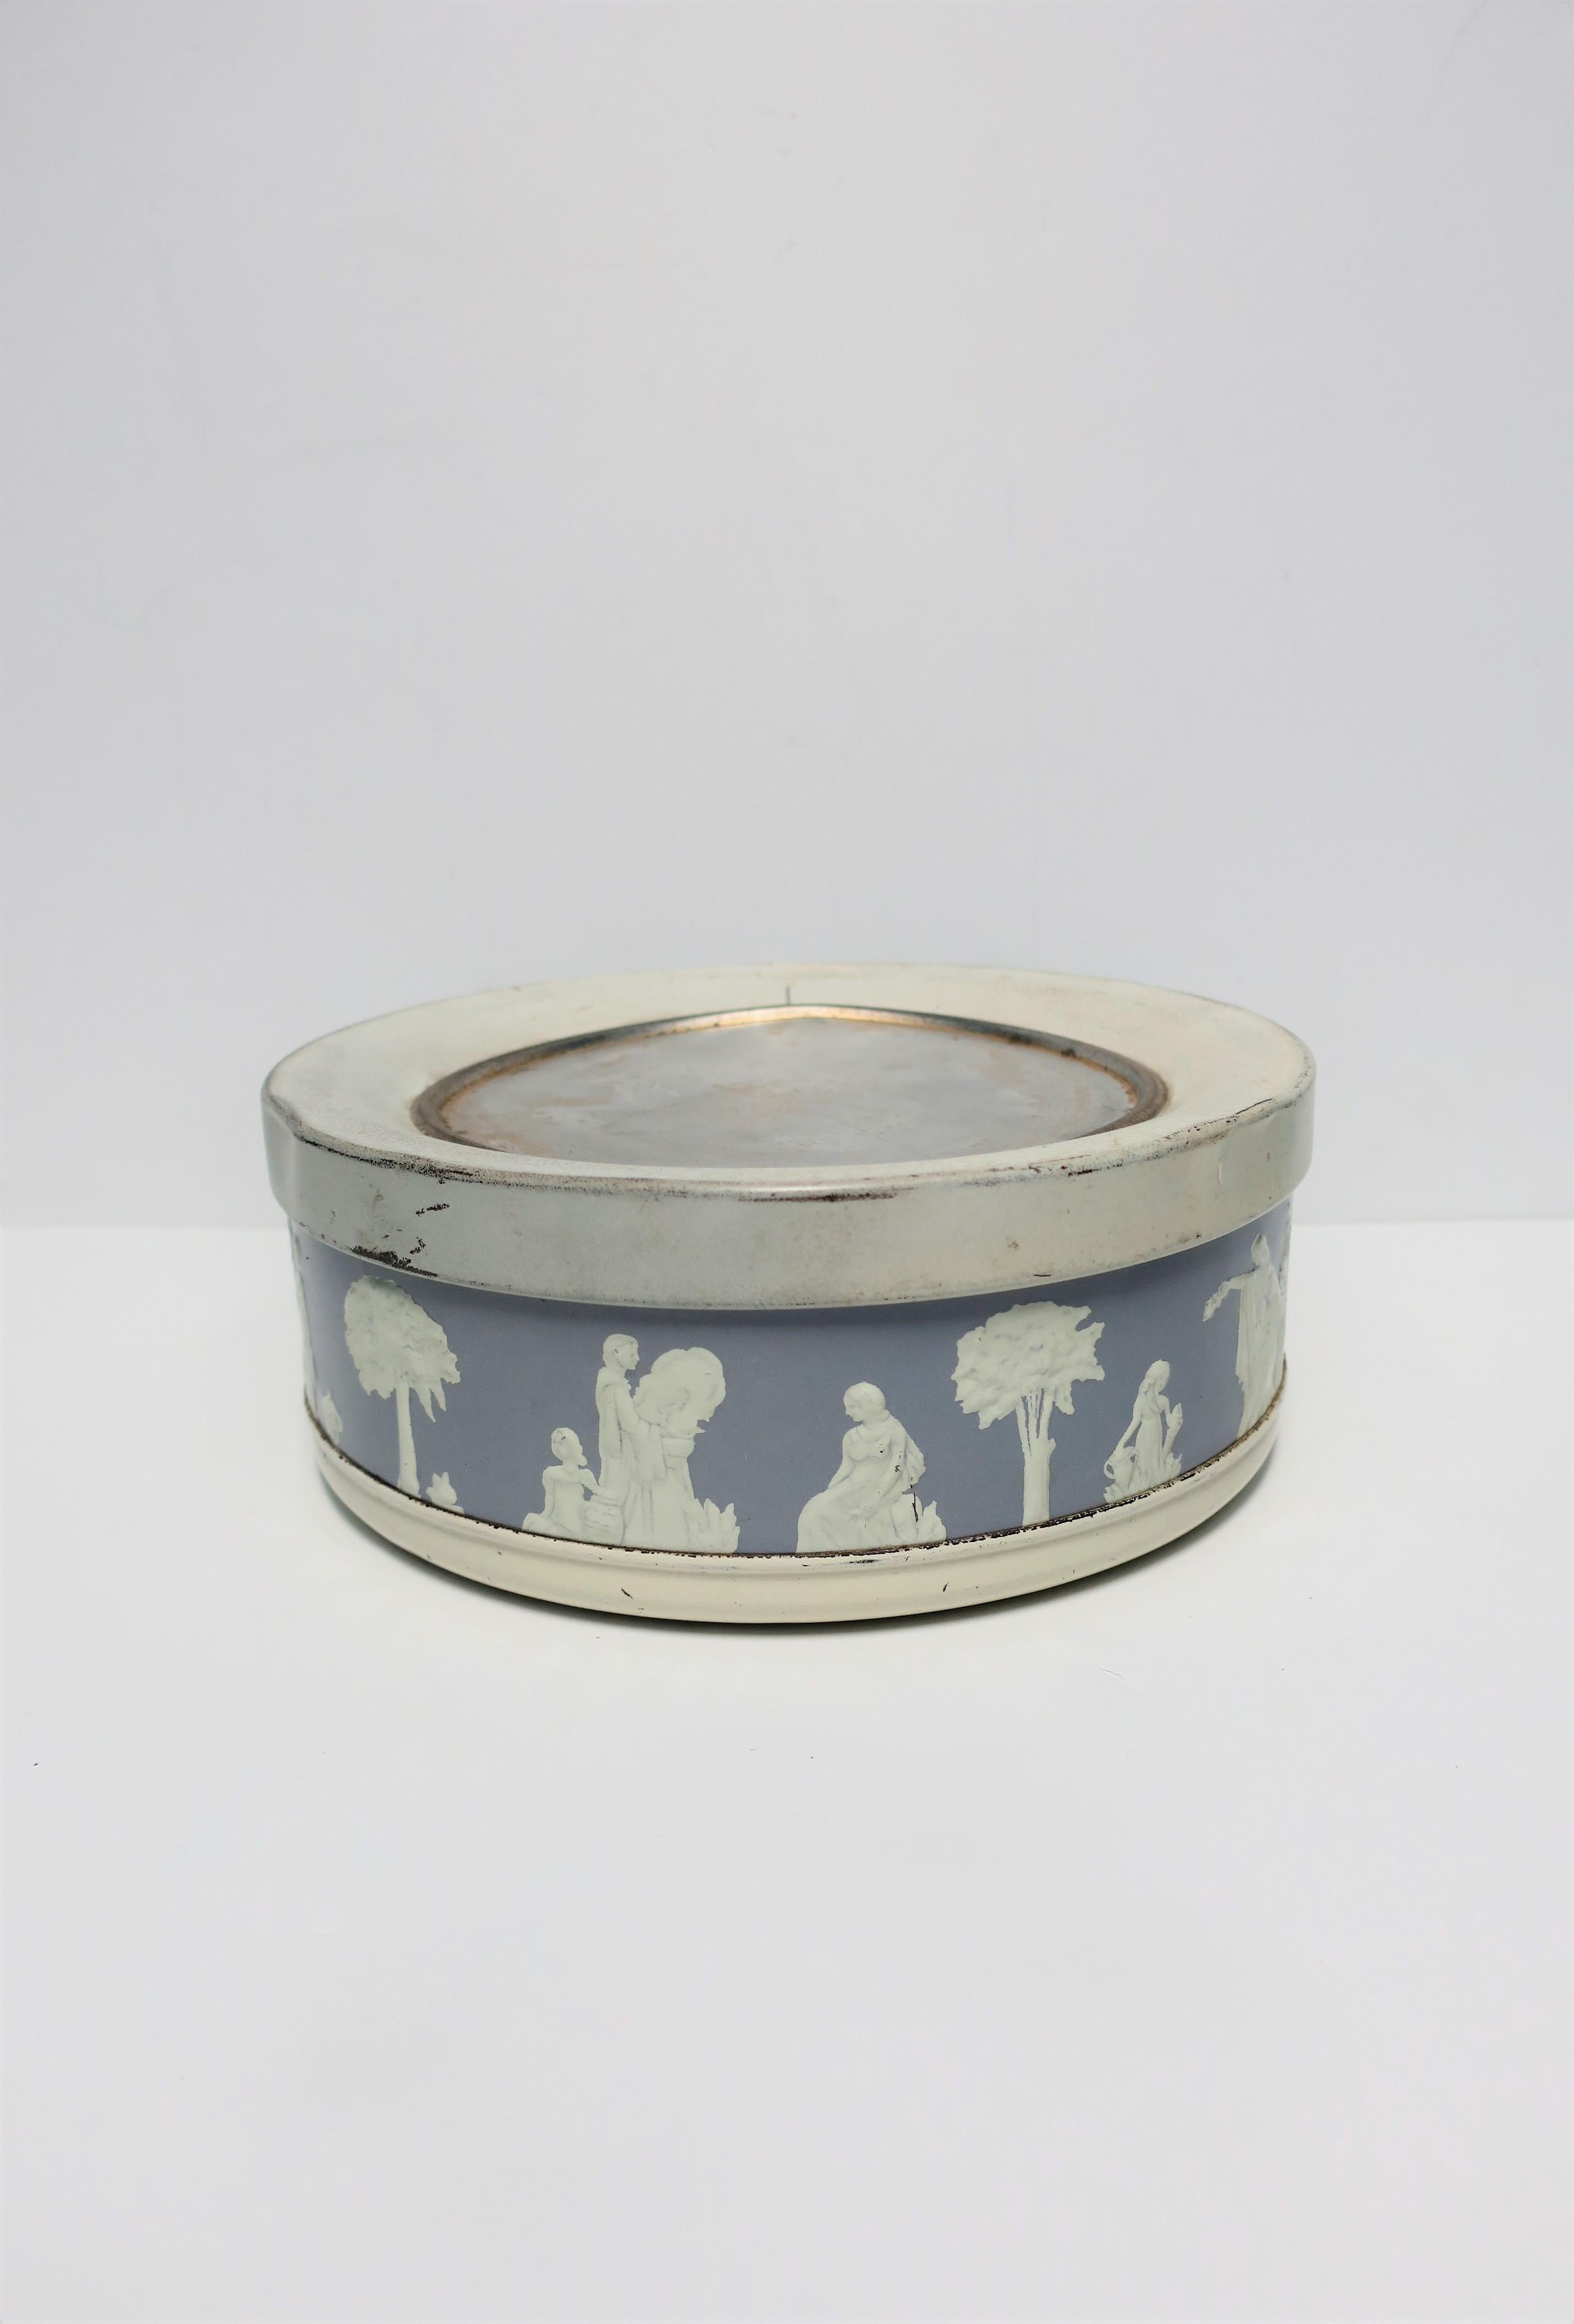 Neoclassical Round Box in the Style of the Wedgwood For Sale 2